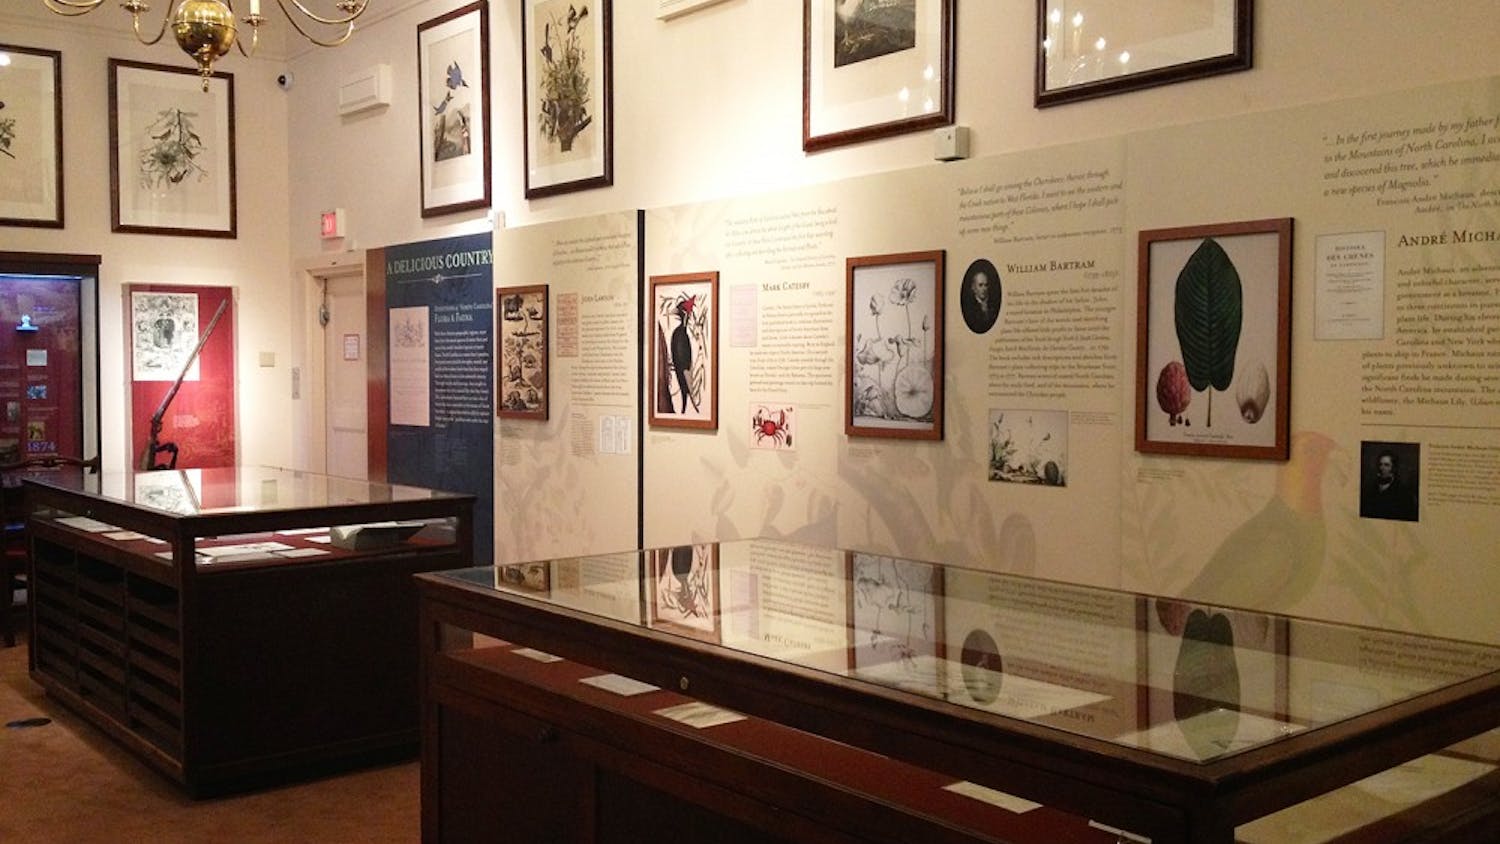 Highlighting the legacy of John and William Bartram, the “Following in the Bartrams’ Footsteps” traveling exhibit is on display at the North Carolina Botanical Garden through Nov. 2.